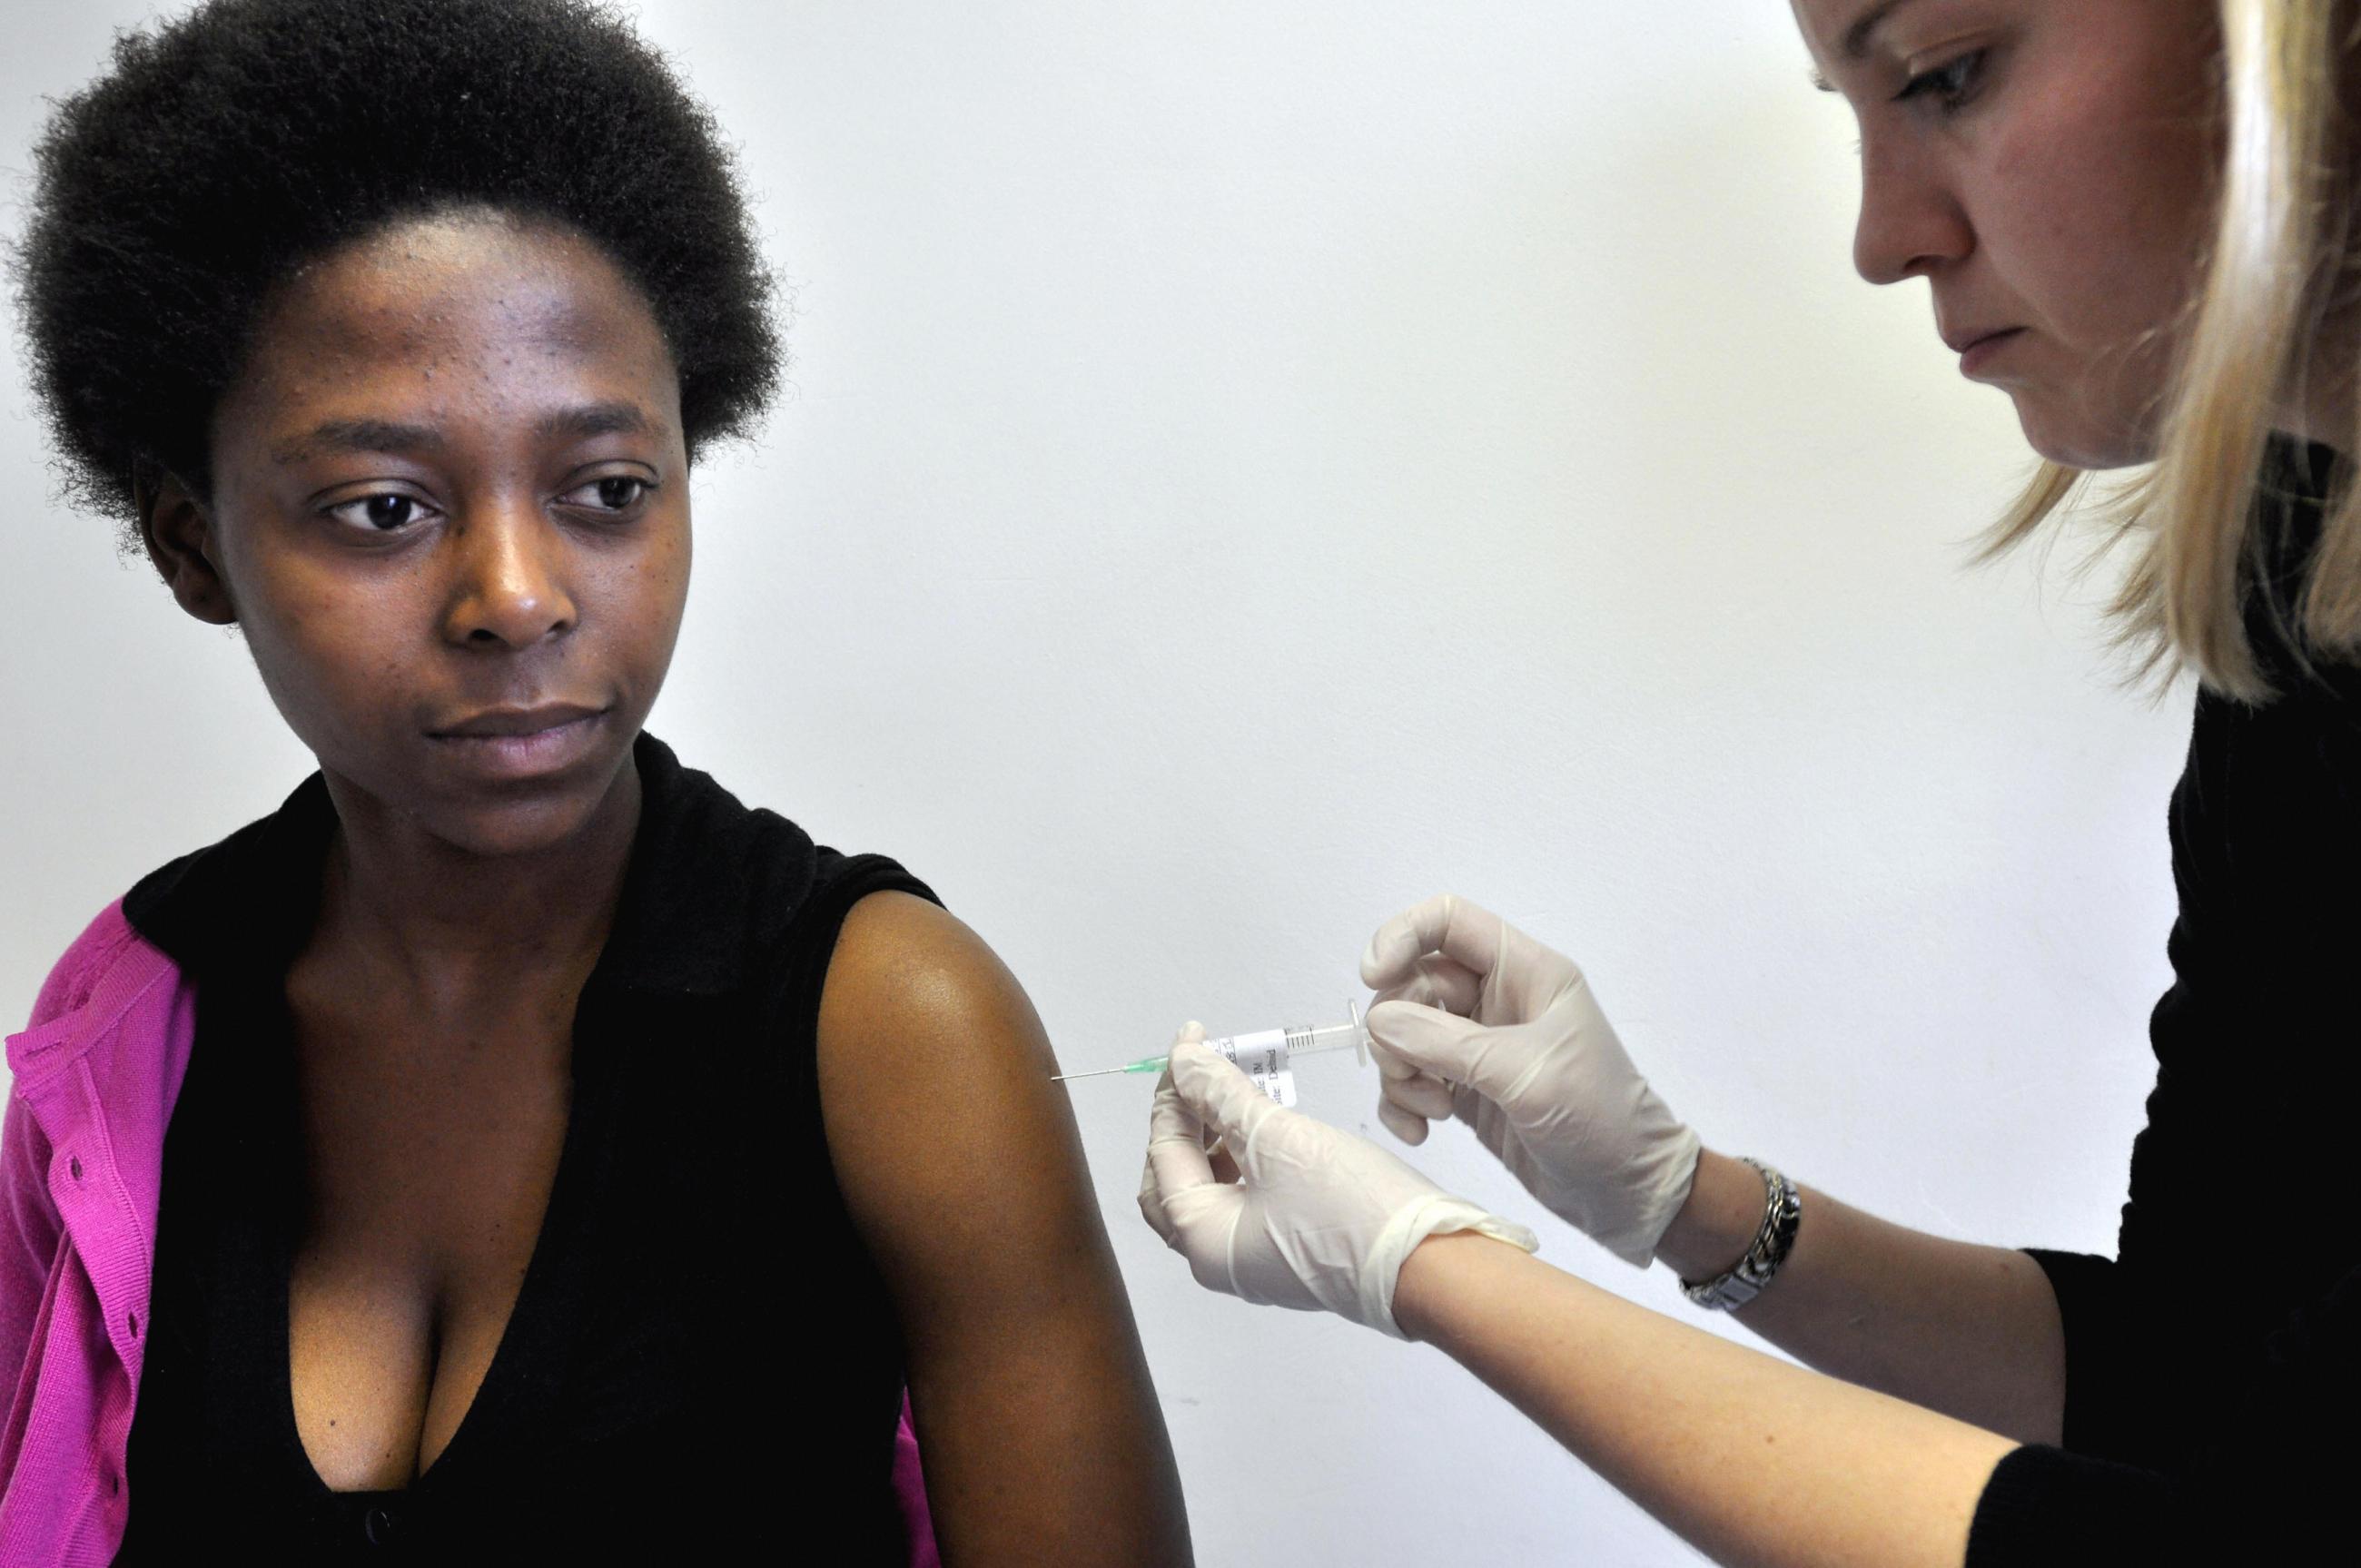 Physician Camilla Samways with volunteer Nobathembu Mbembe who is receiving the African-produced HIV vaccine at the iEmavundleni Centre, in Crossroads, Cape Town, South Africa, on July 28, 2009. 